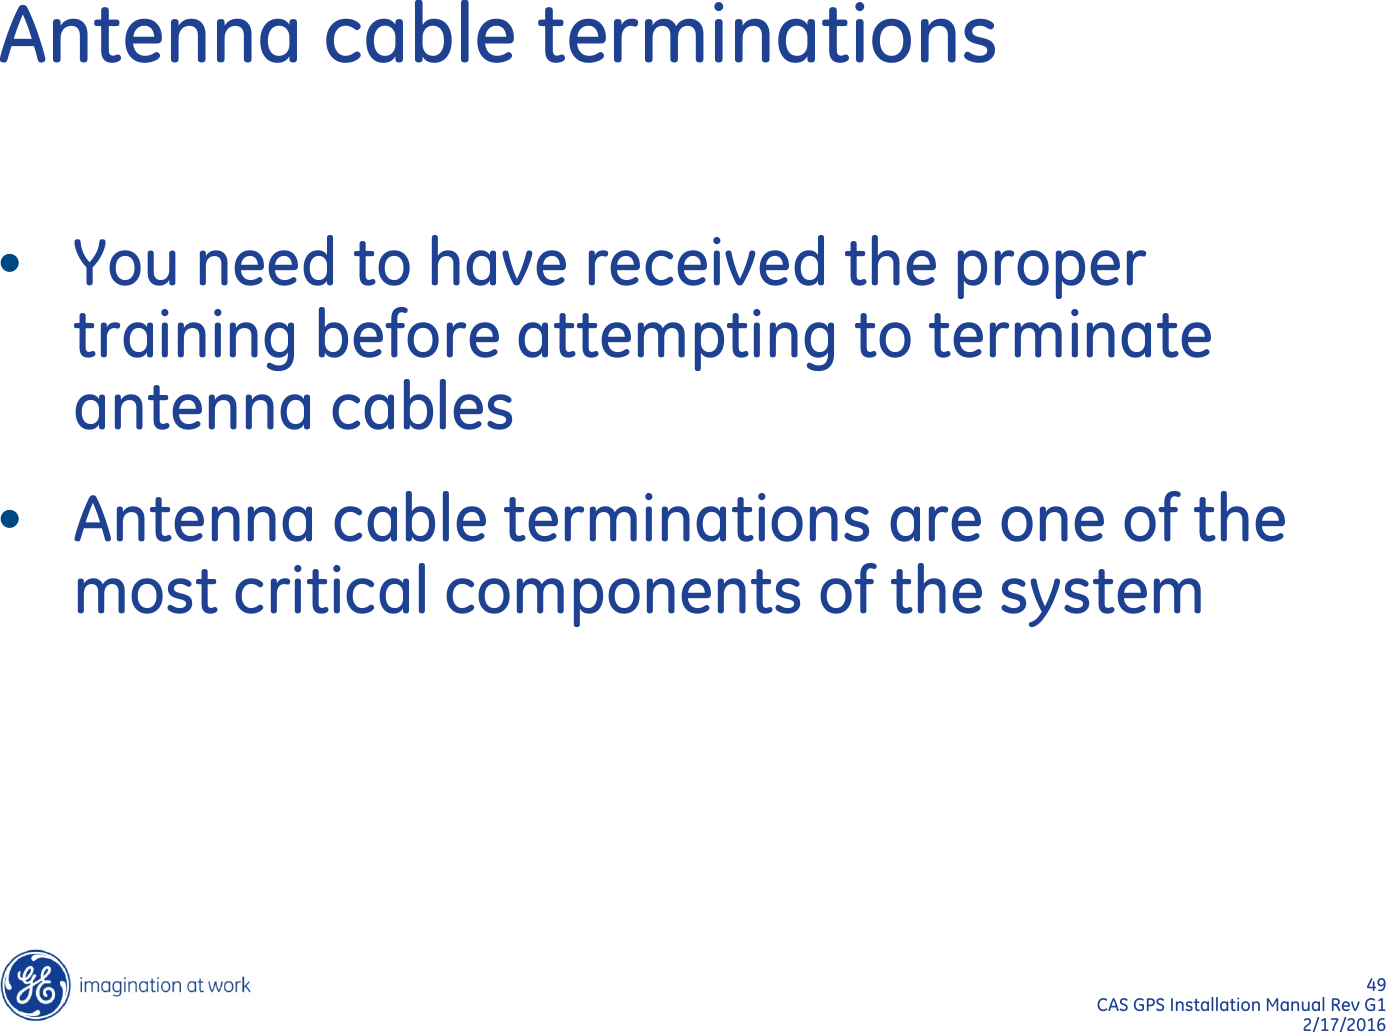 49  CAS GPS Installation Manual Rev G1 2/17/2016 Antenna cable terminations •You need to have received the proper training before attempting to terminate antenna cables •Antenna cable terminations are one of the most critical components of the system 